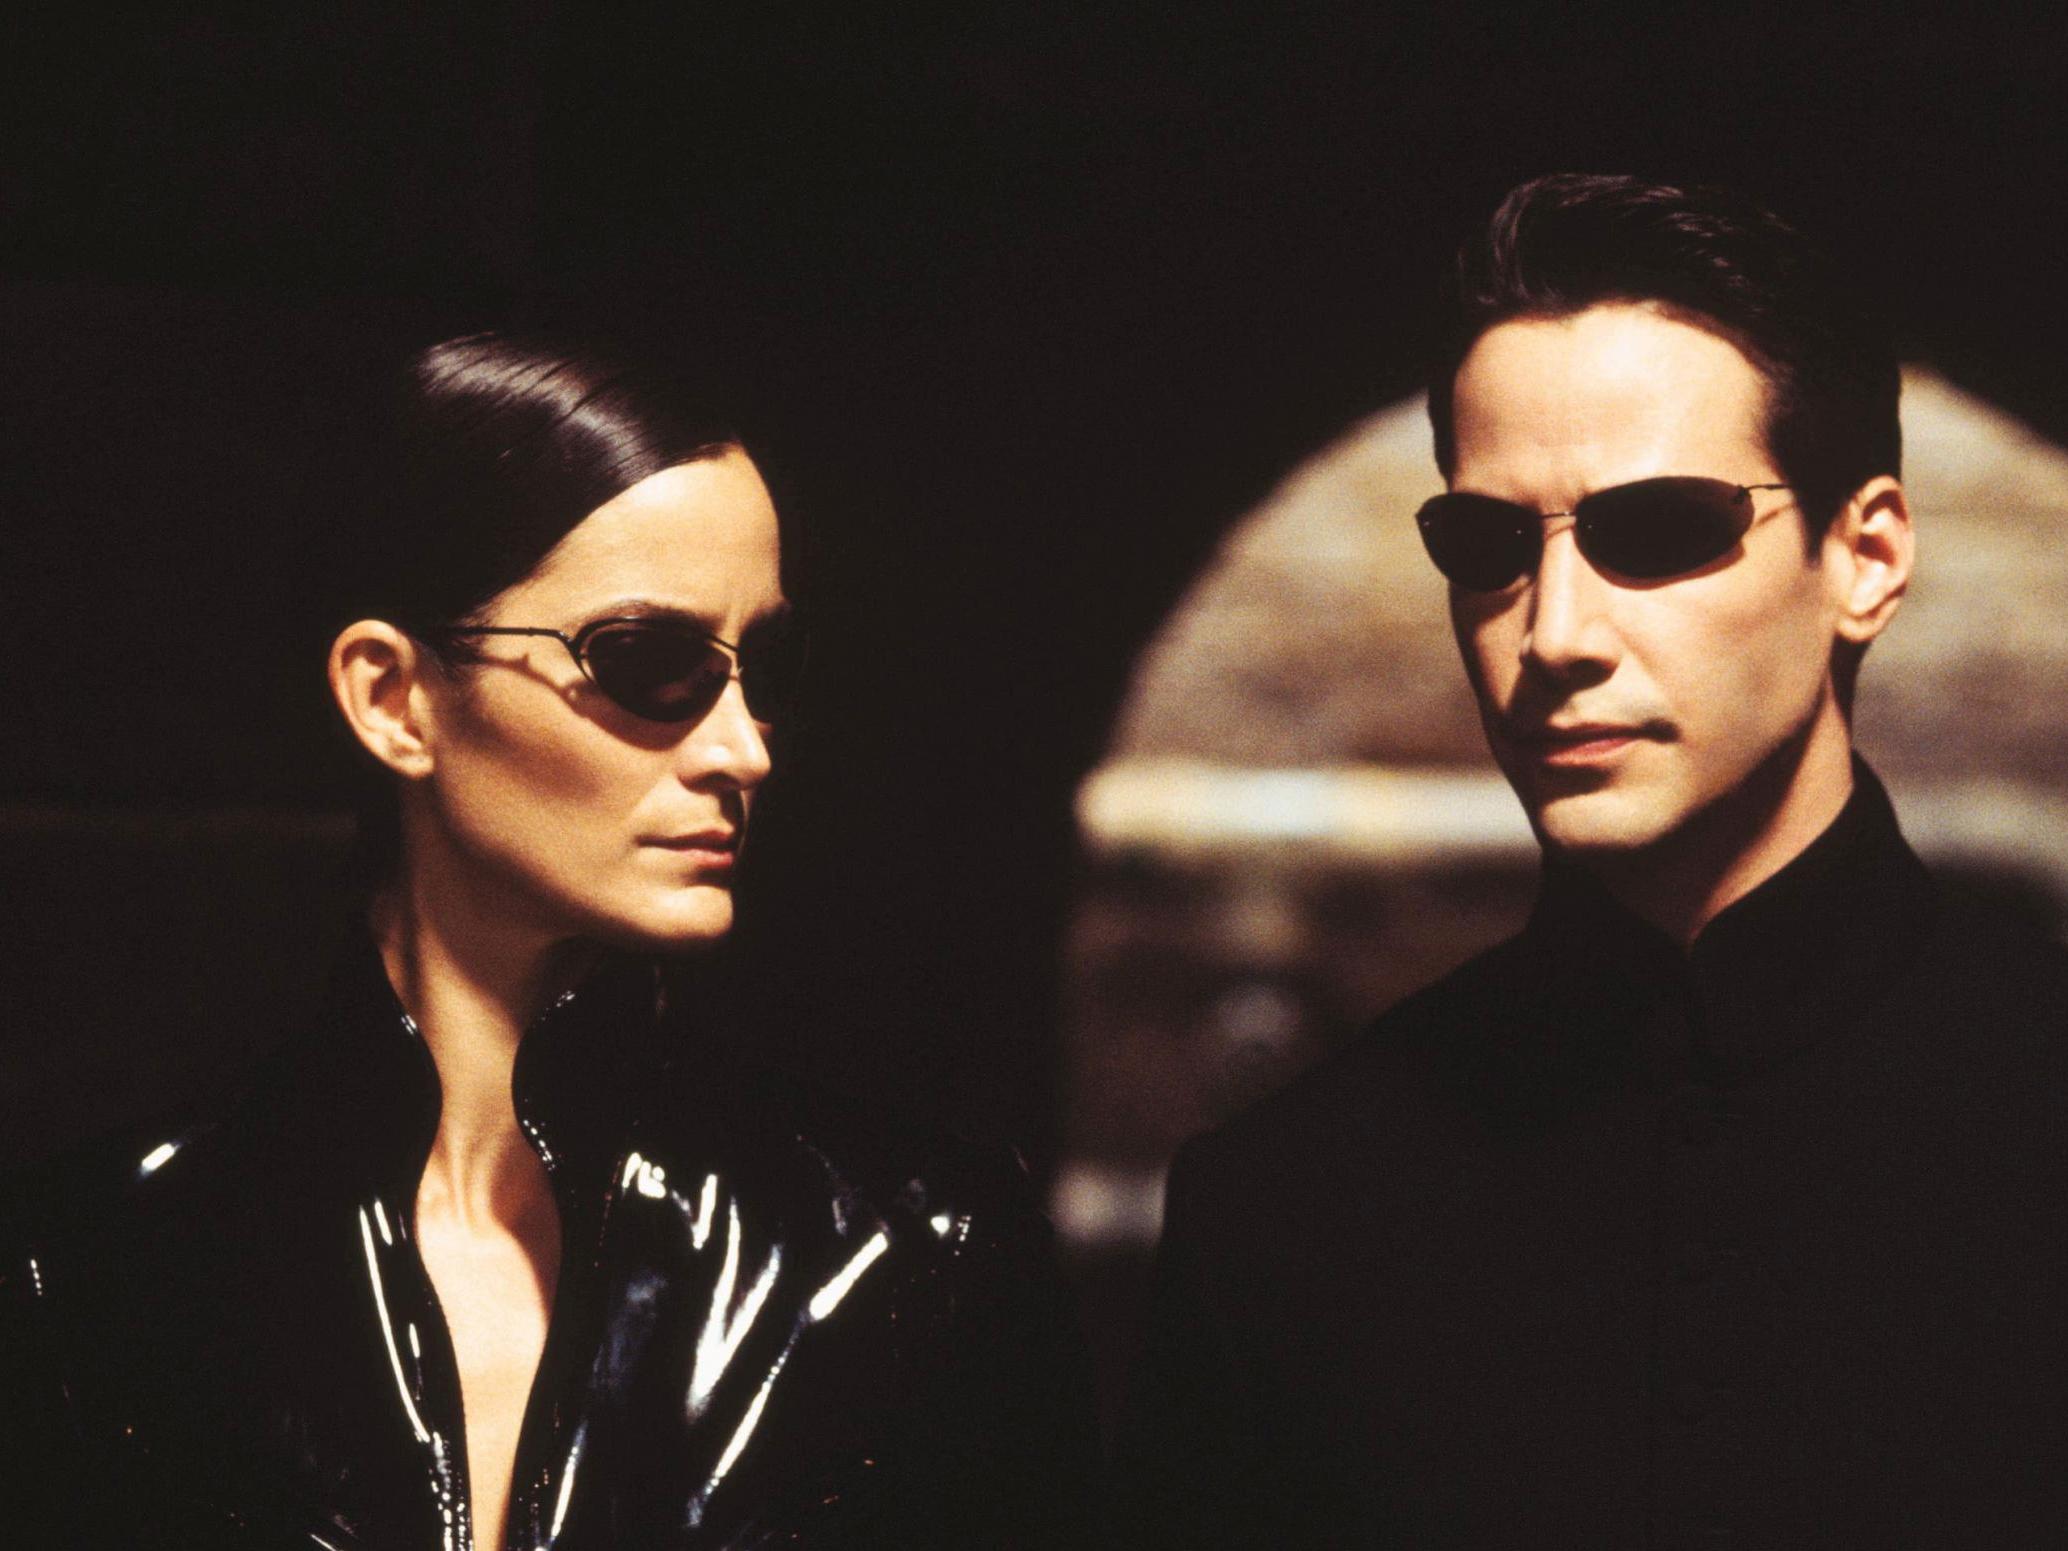 The Matrix 4 set footage shows Keanu Reeves and Carrie Ann Moss filming scene as Neo and Trinity